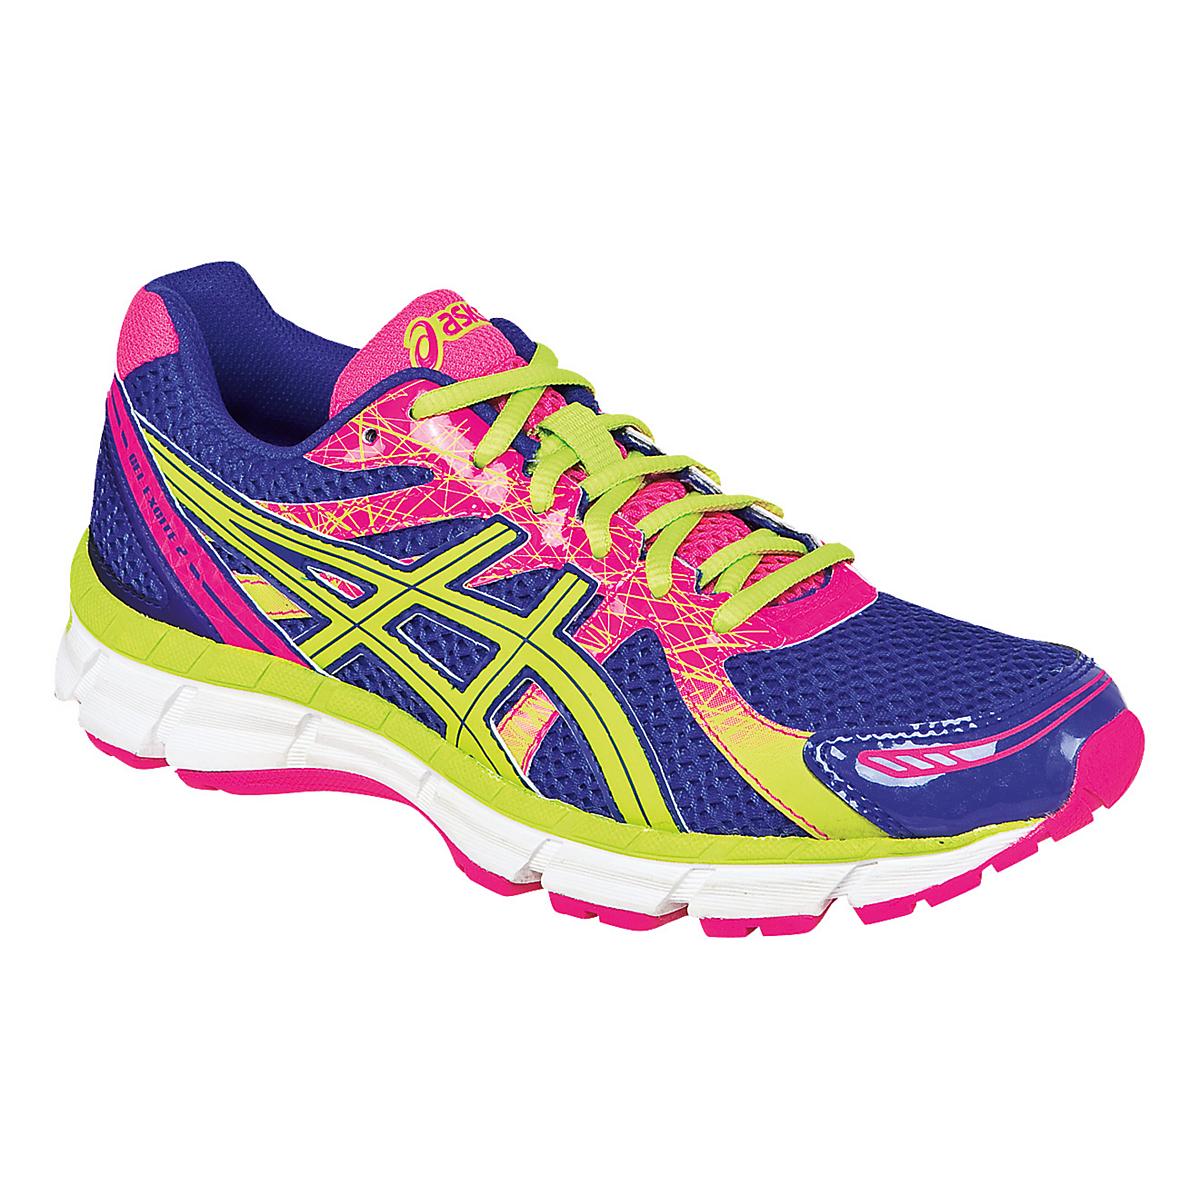 Womens ASICS GEL-Excite 2 Running Shoe at Road Runner Sports